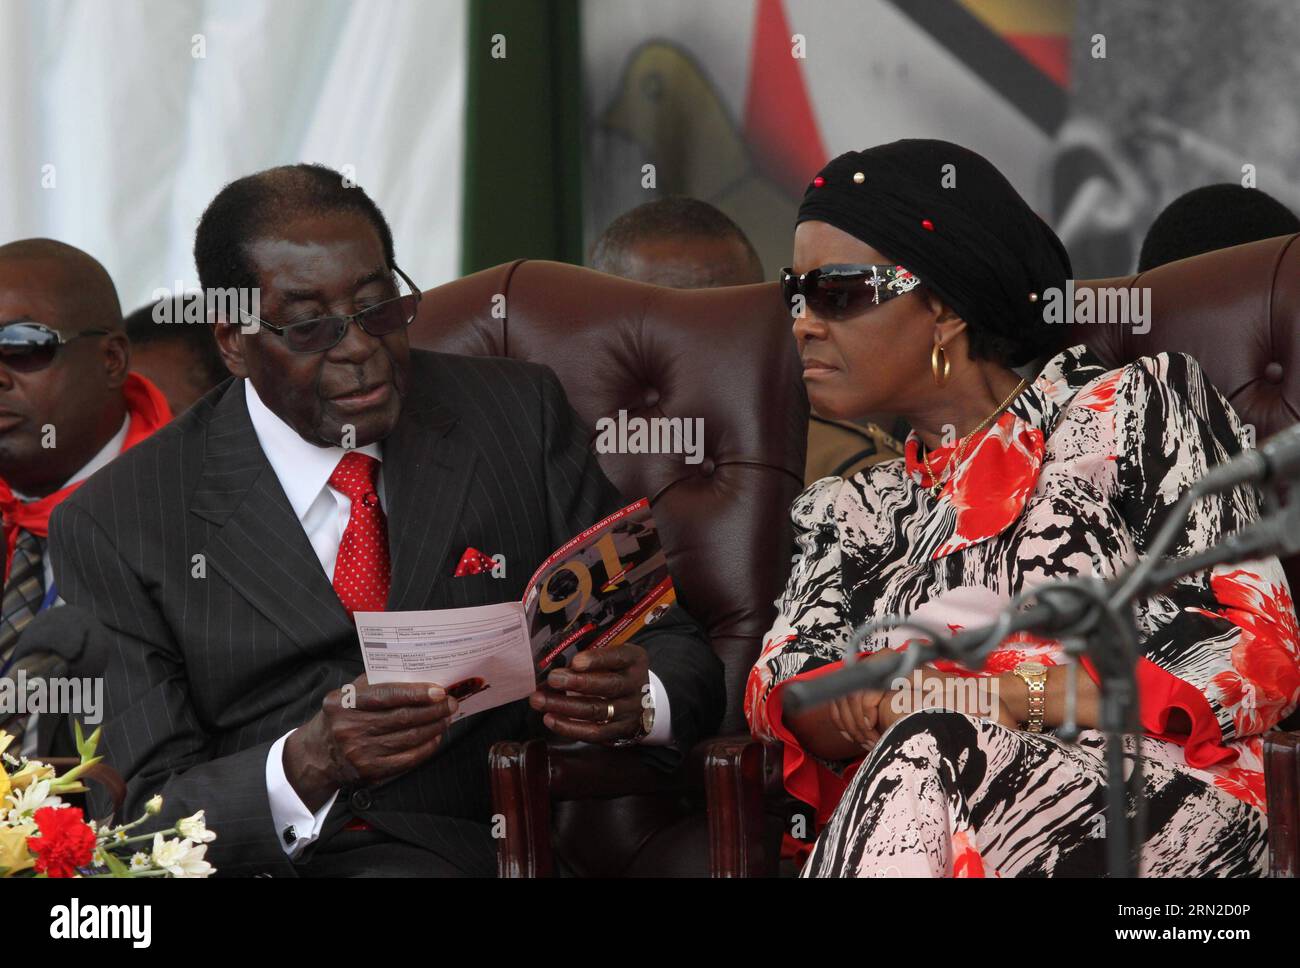 (150228) -- VICTORIA FALLS (ZIMBABWE), Feb. 28, 2015 () -- Zimbabwean President Robert Mugabe (L) and his wife Grace Mugabe browse a brochure on the podium at a public celebration held to mark his 91st birthday in Victoria Falls, Zimbabwe, Feb. 28, 2015. Mugabe, who turns 91 this month, is the oldest leader in the world and one of the longest-serving African statesmen. Having ruled Zimbabwe for 35 years since independence, Mugabe was endorsed by the ruling ZANU-PF party as the sole candidate to contest at the age of 94 in the next presidential election in 2018. () ZIMBABWE-VICTORIA FALLS-MUGAB Stock Photo